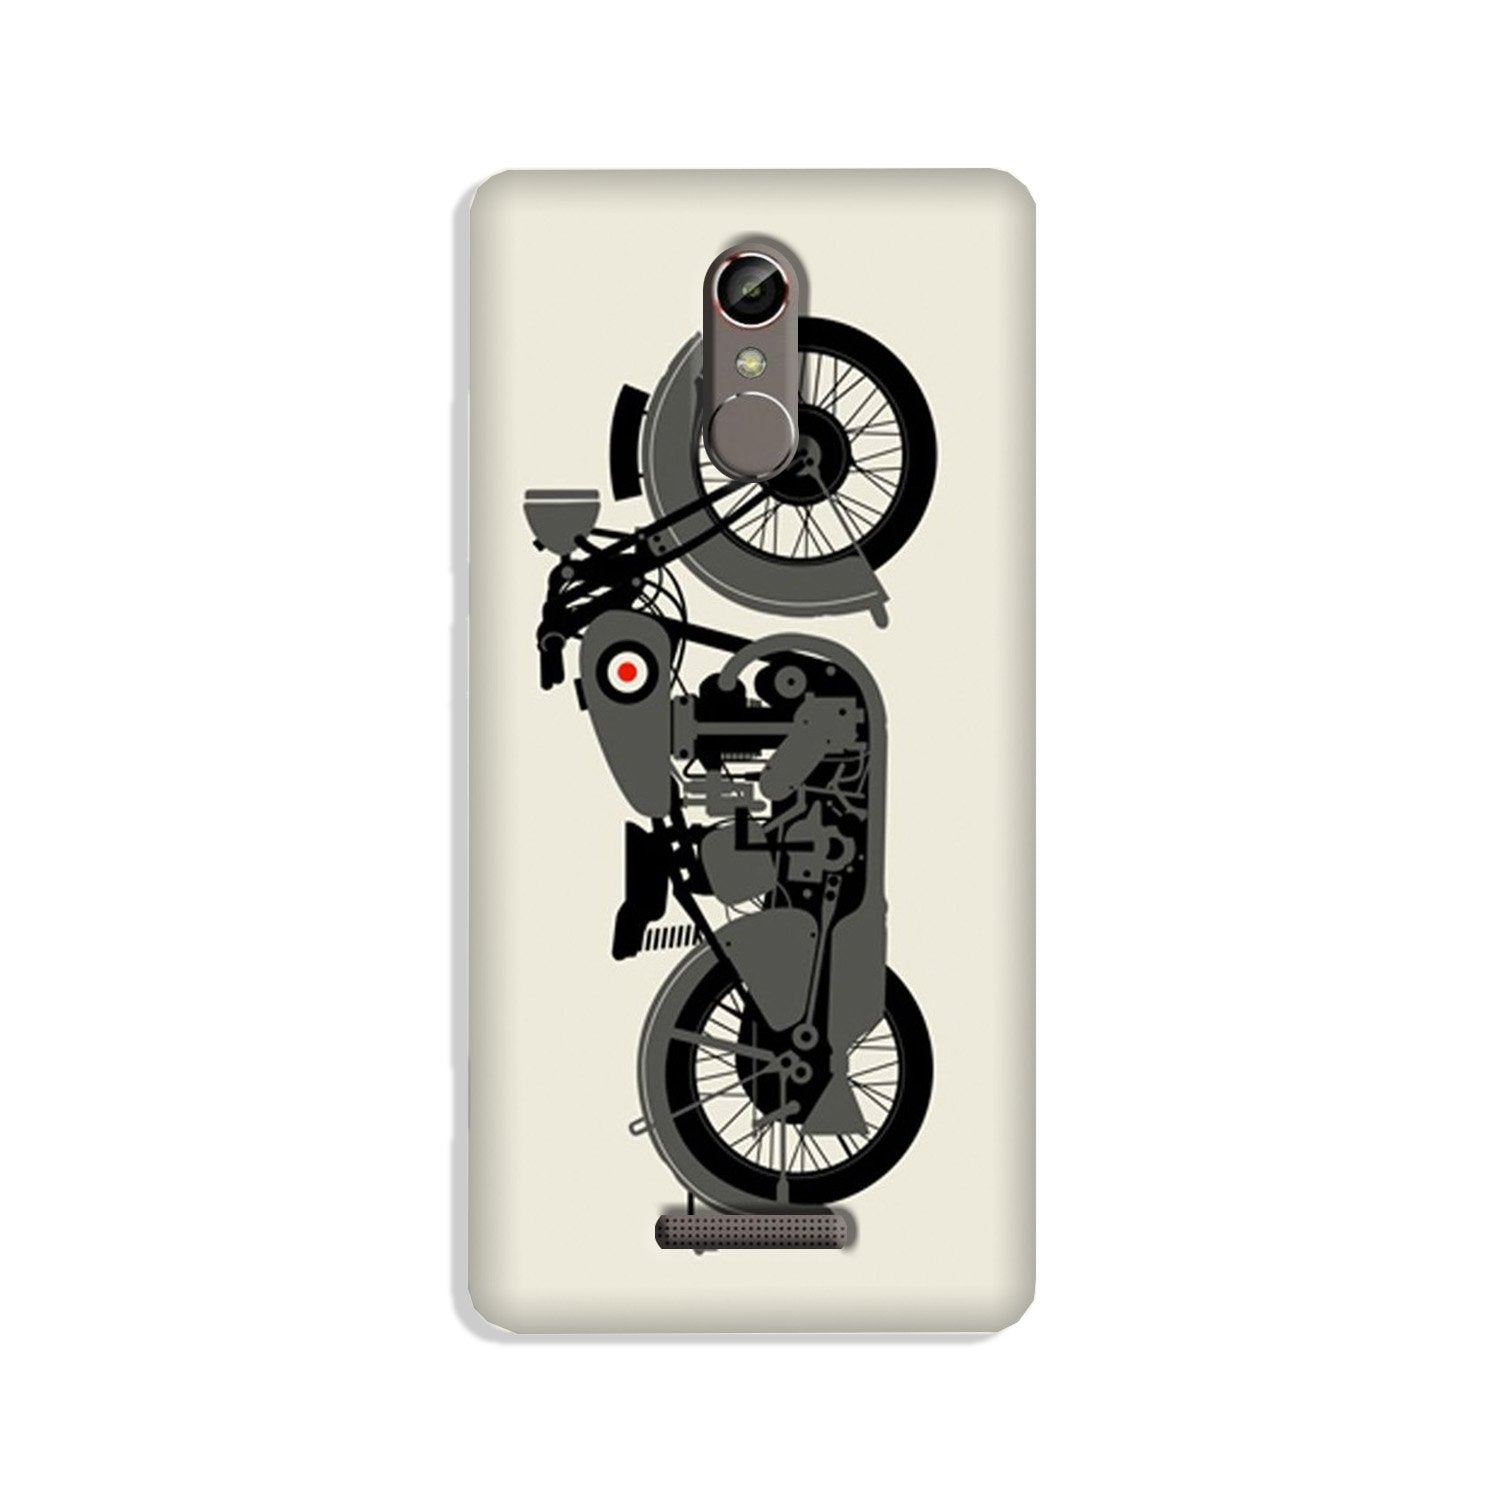 MotorCycle Case for Gionee S6s (Design No. 259)